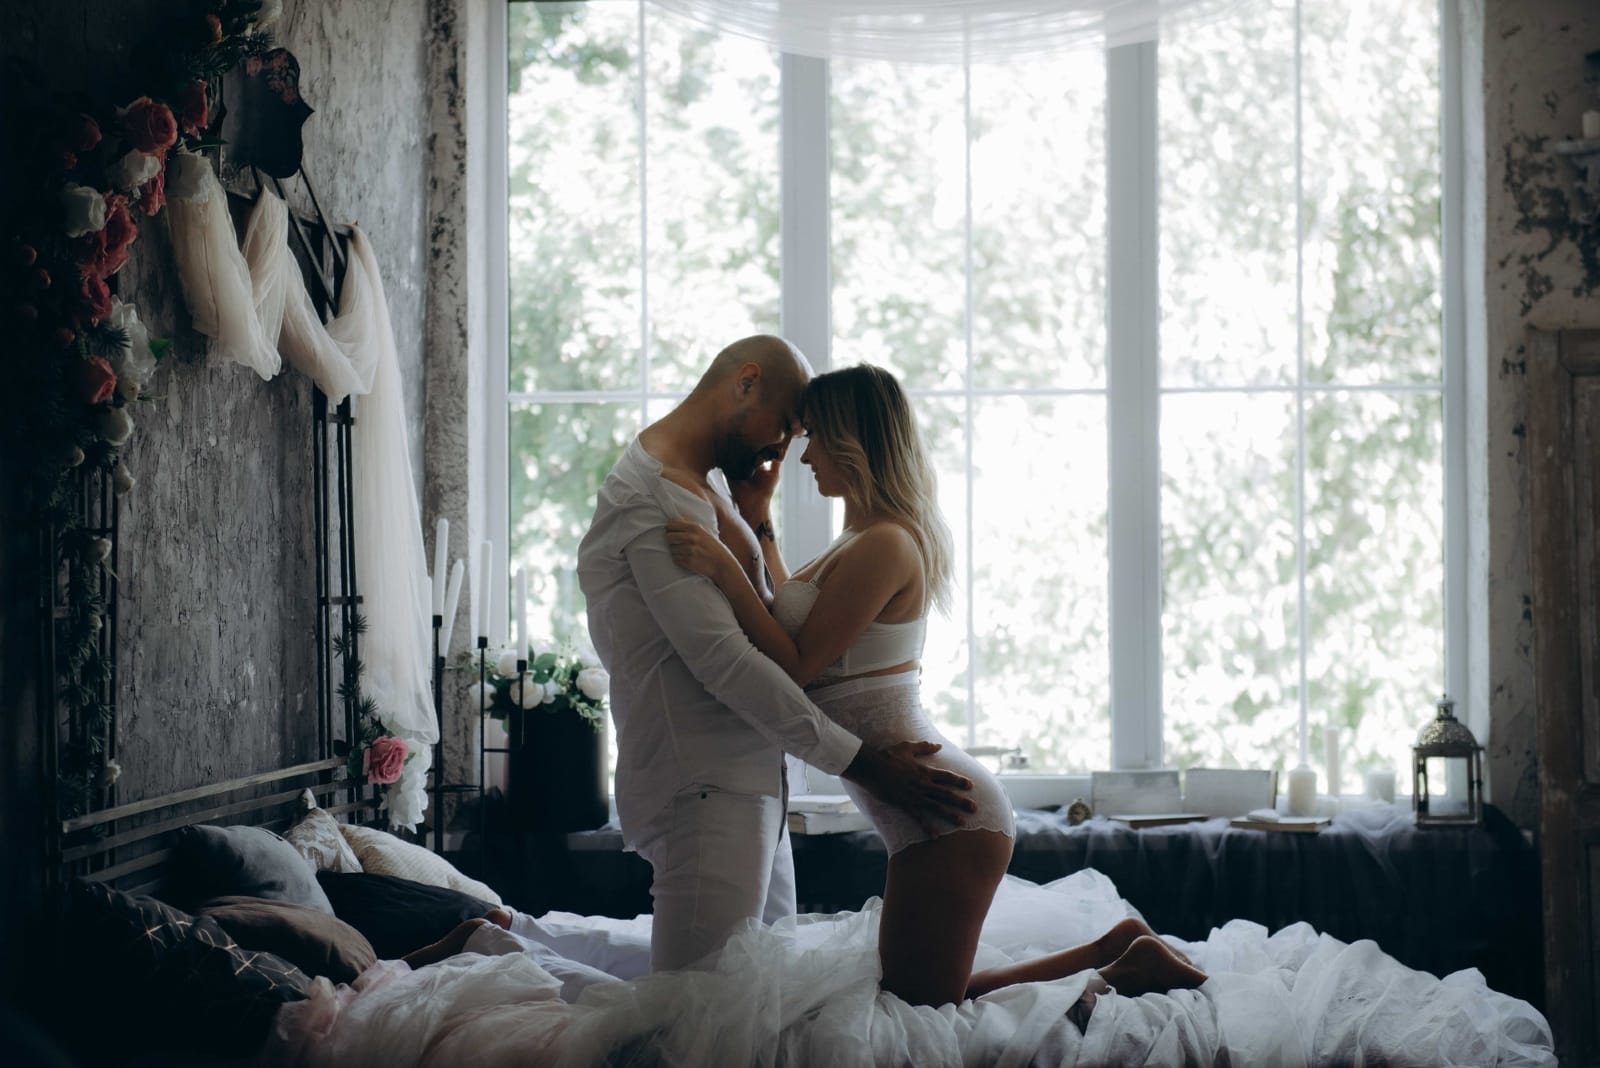 man and woman kneeling on bed during daytime